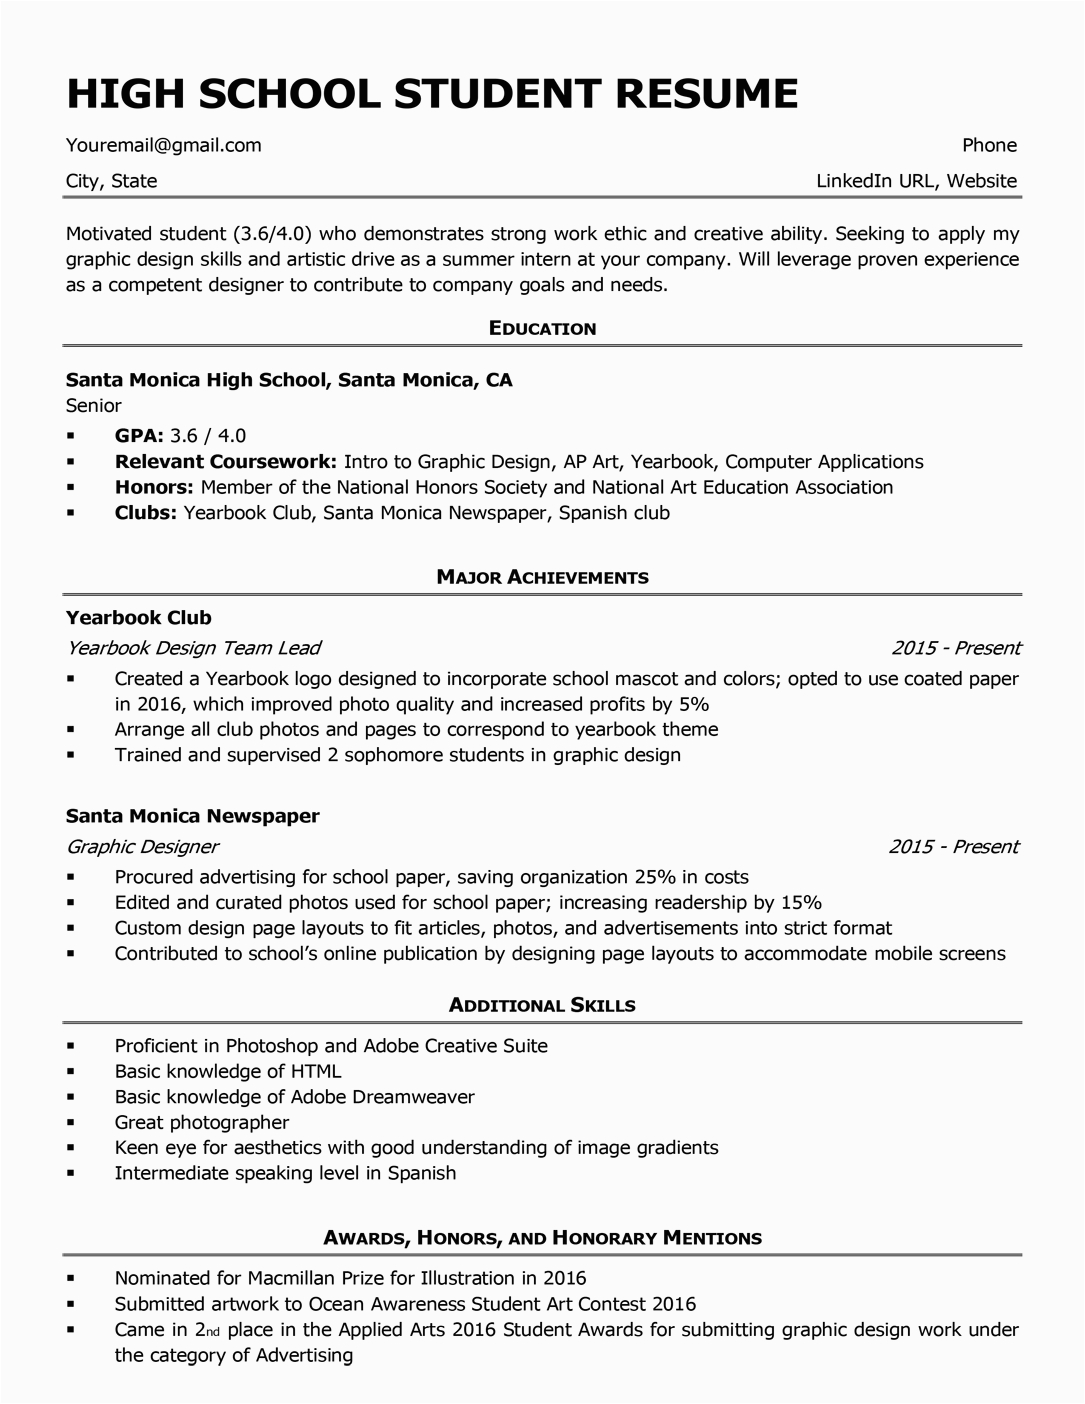 Sample Resume From A High School Student High School Resume Template & Writing Tips